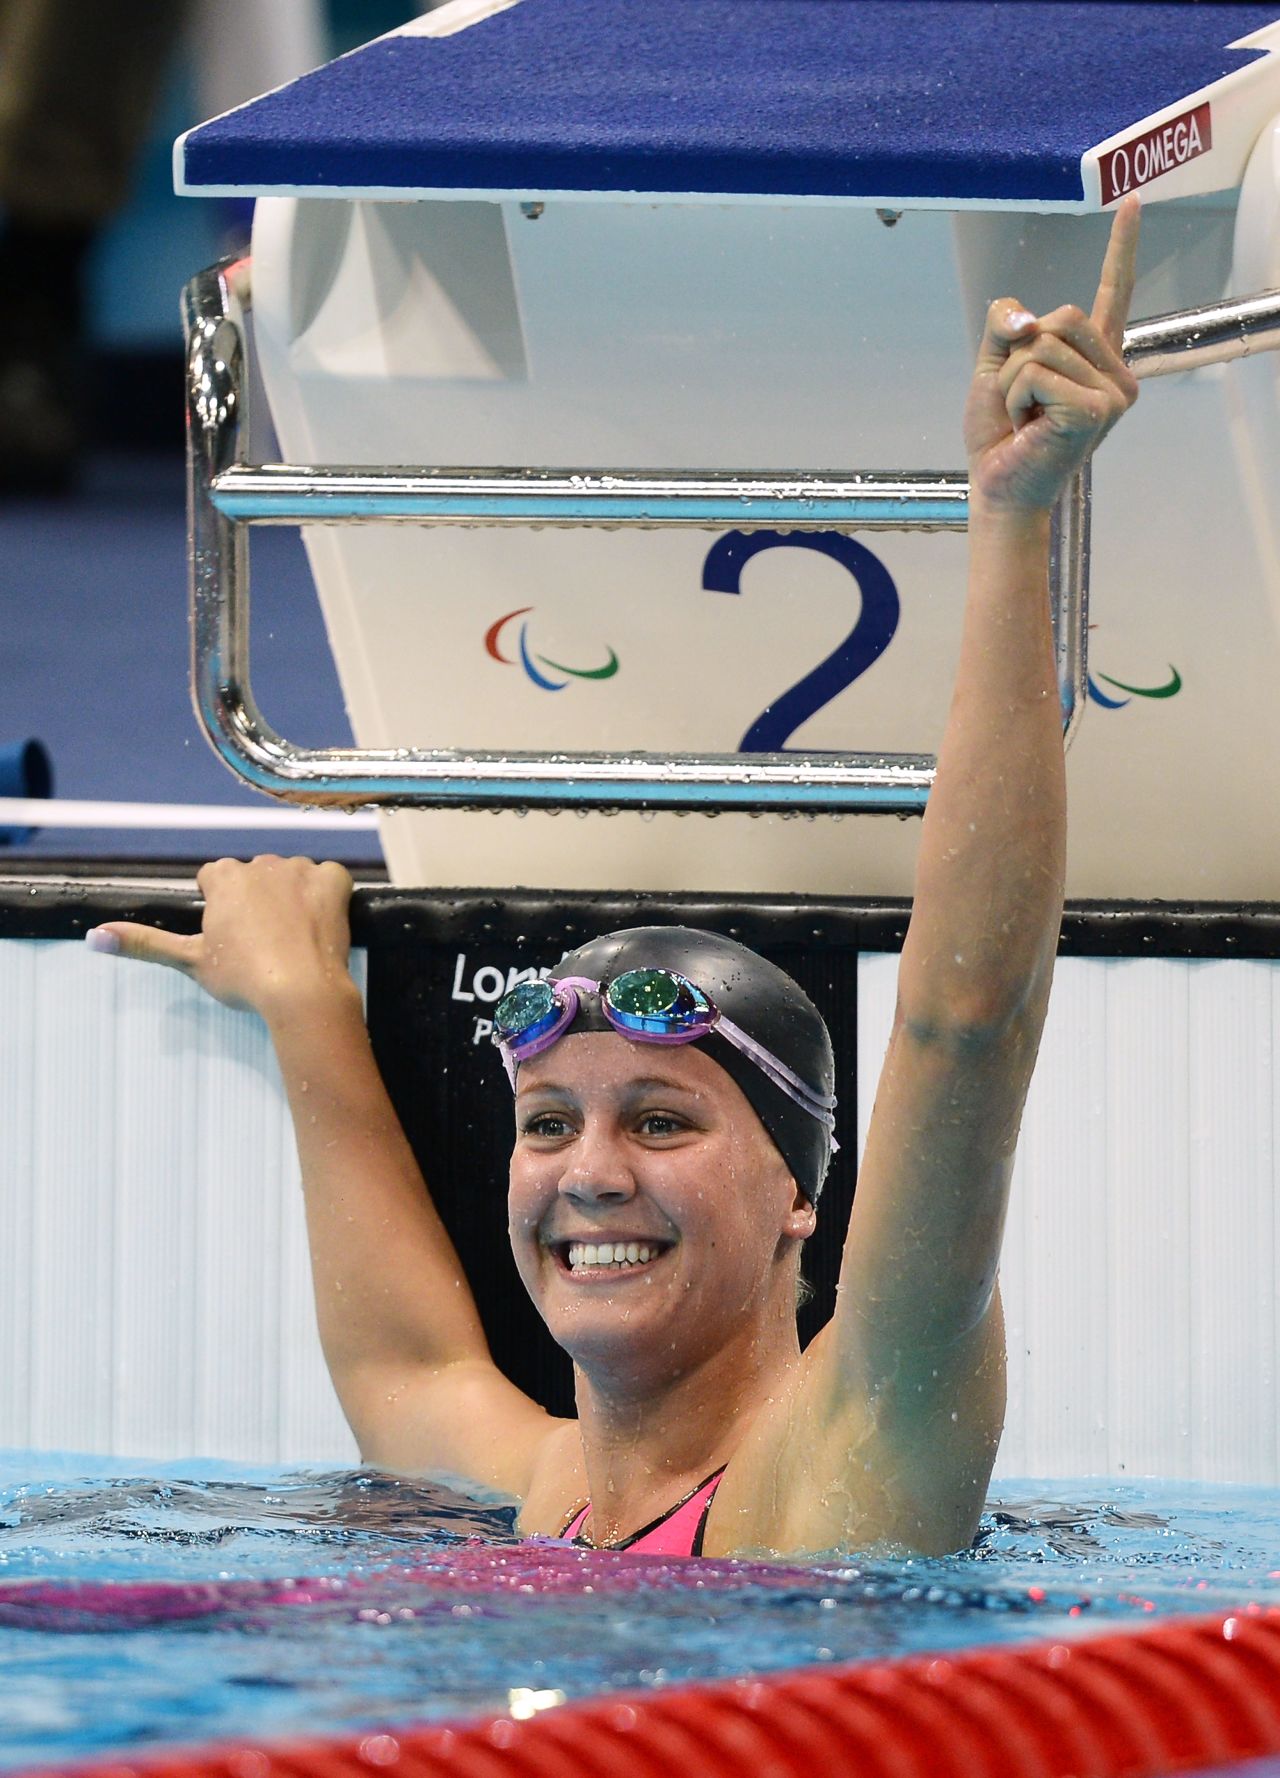 Weggemann's first love is swimming and her crowning achievement was taking gold in the 50m freestyle at the 2012, Paralympics in London. She also won a bronze at the Games to add to her 13 World Championship golds, her 15 world records and 34 American records.